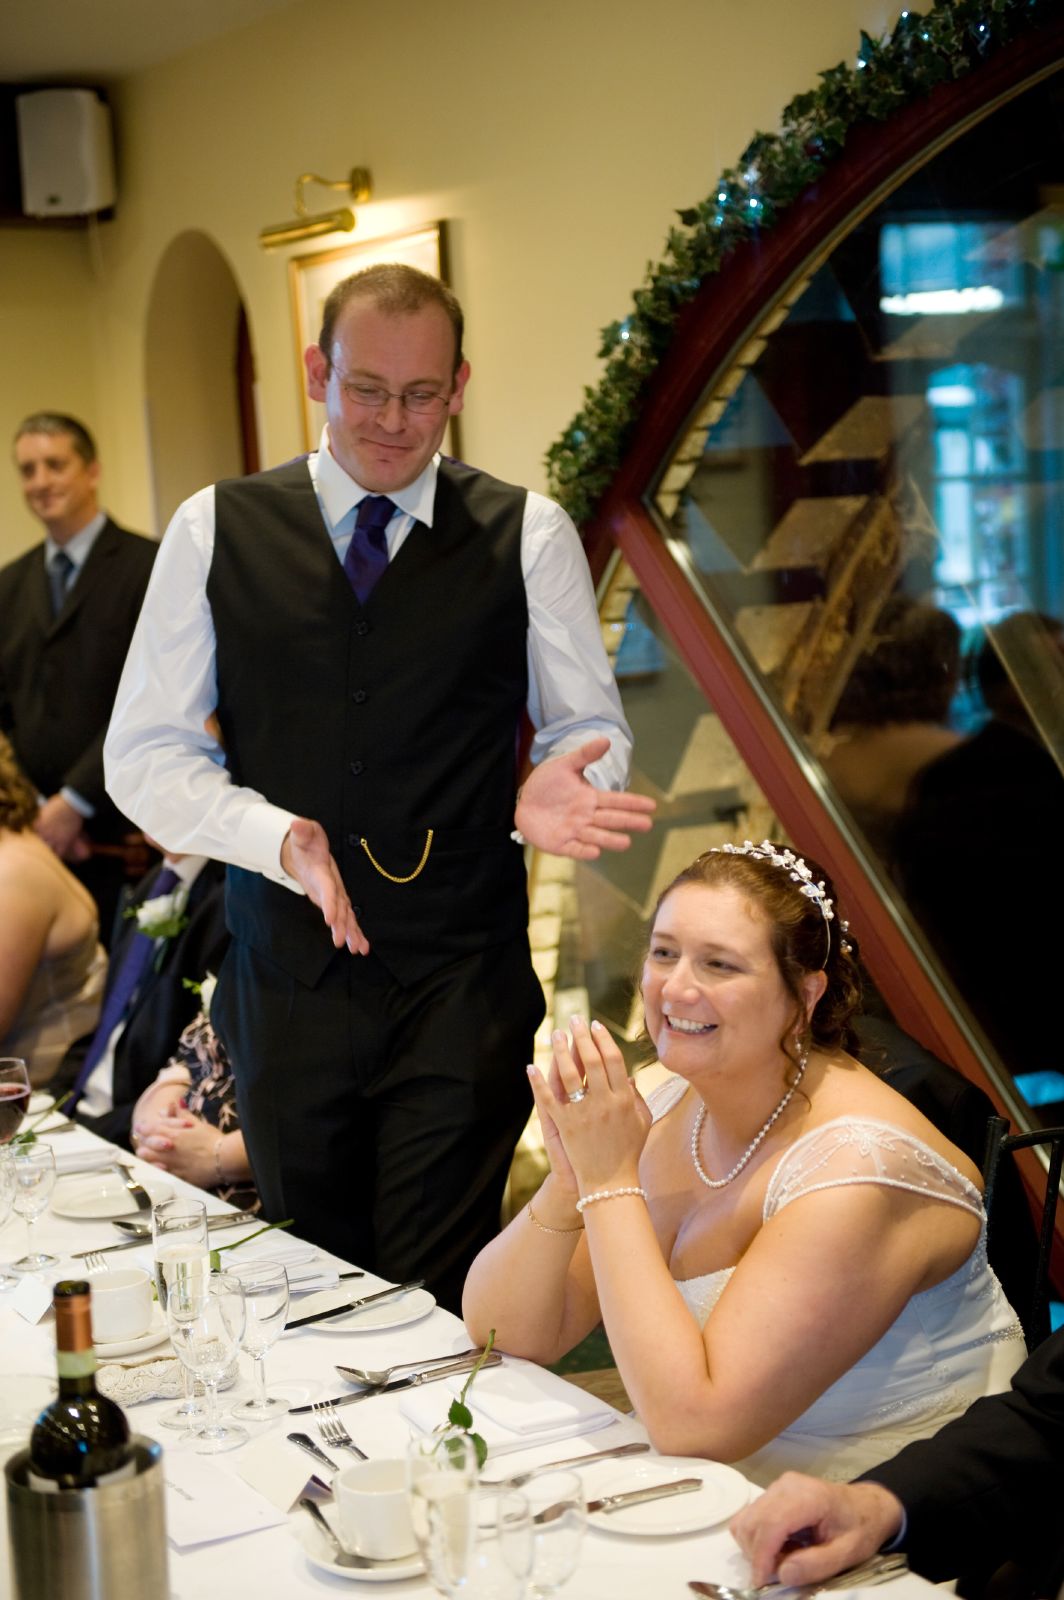 a man is standing behind a bride who is sitting down at a table